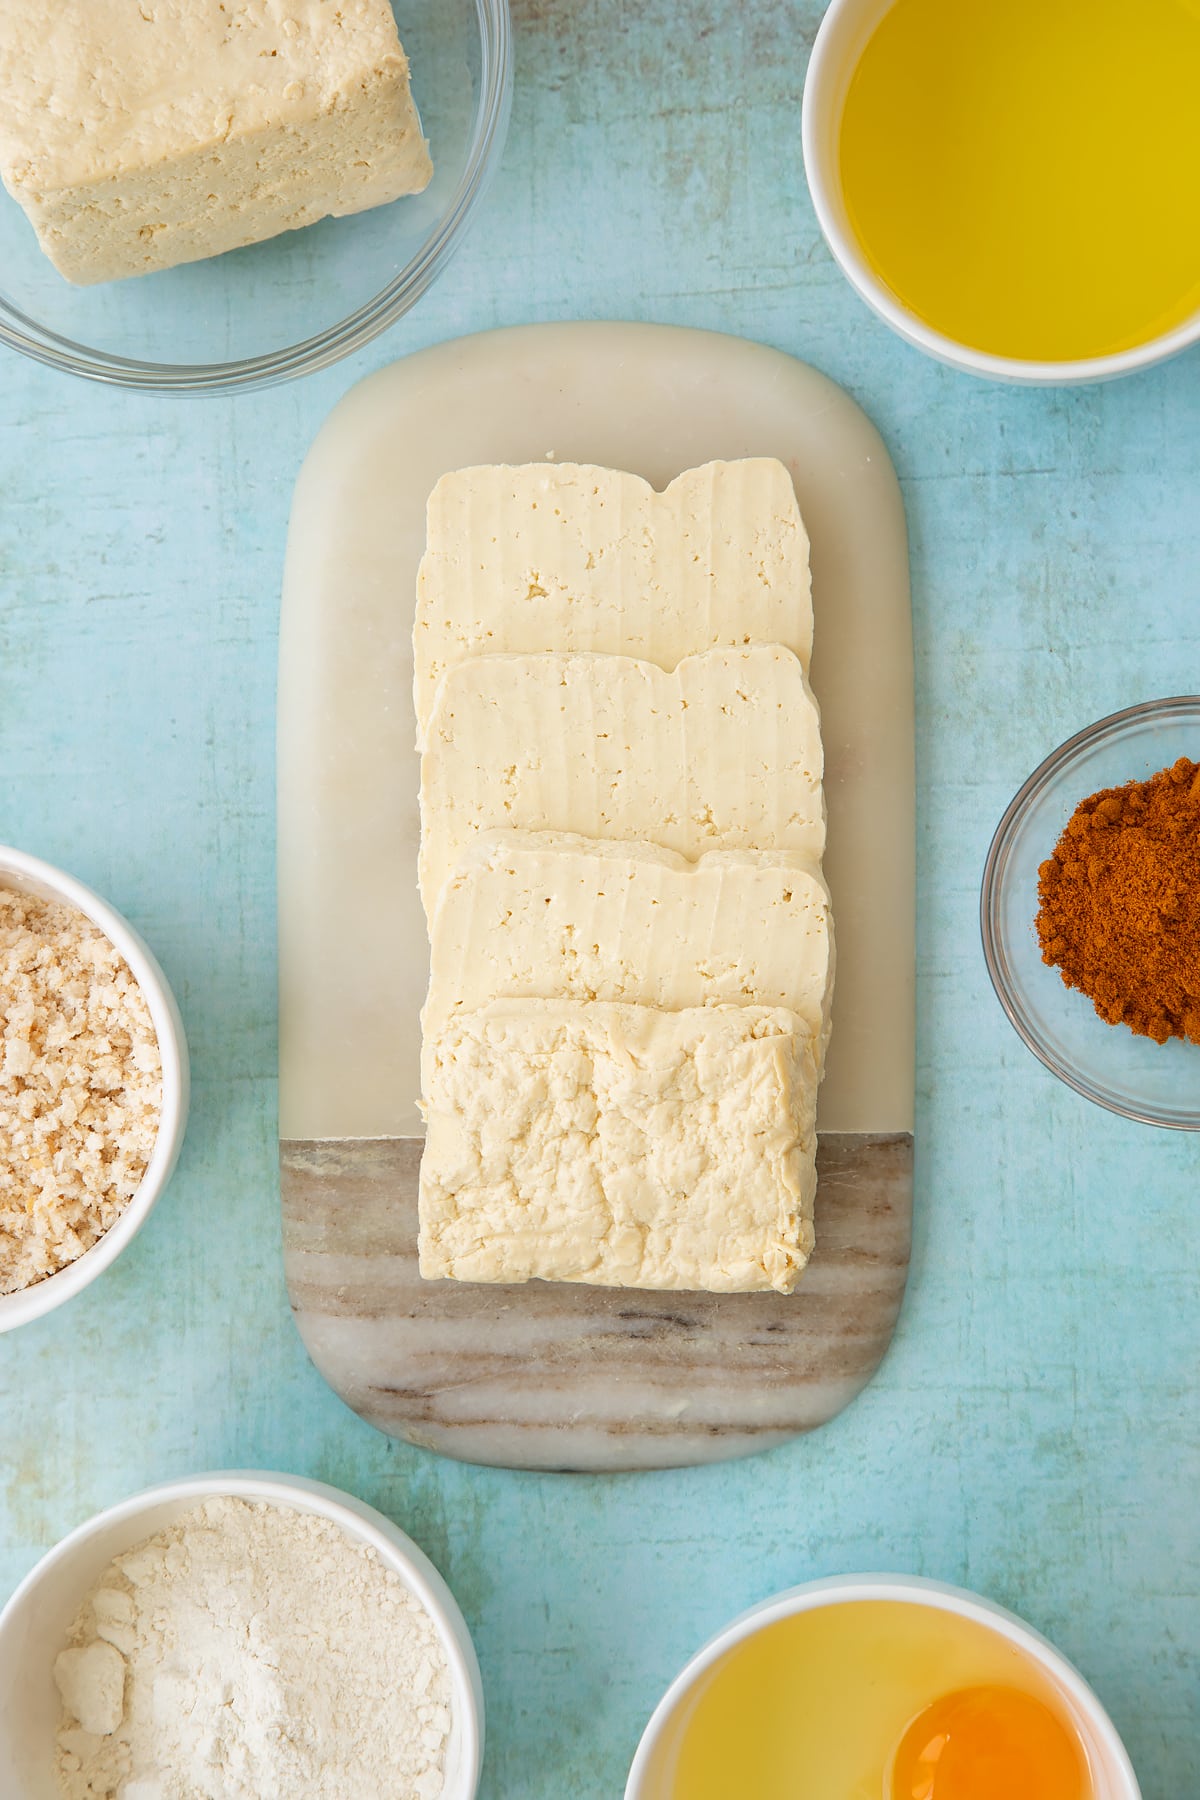 A block of firm tofu cut into slabs on a small marble board. Ingredients to make tofu fingers surround the board.